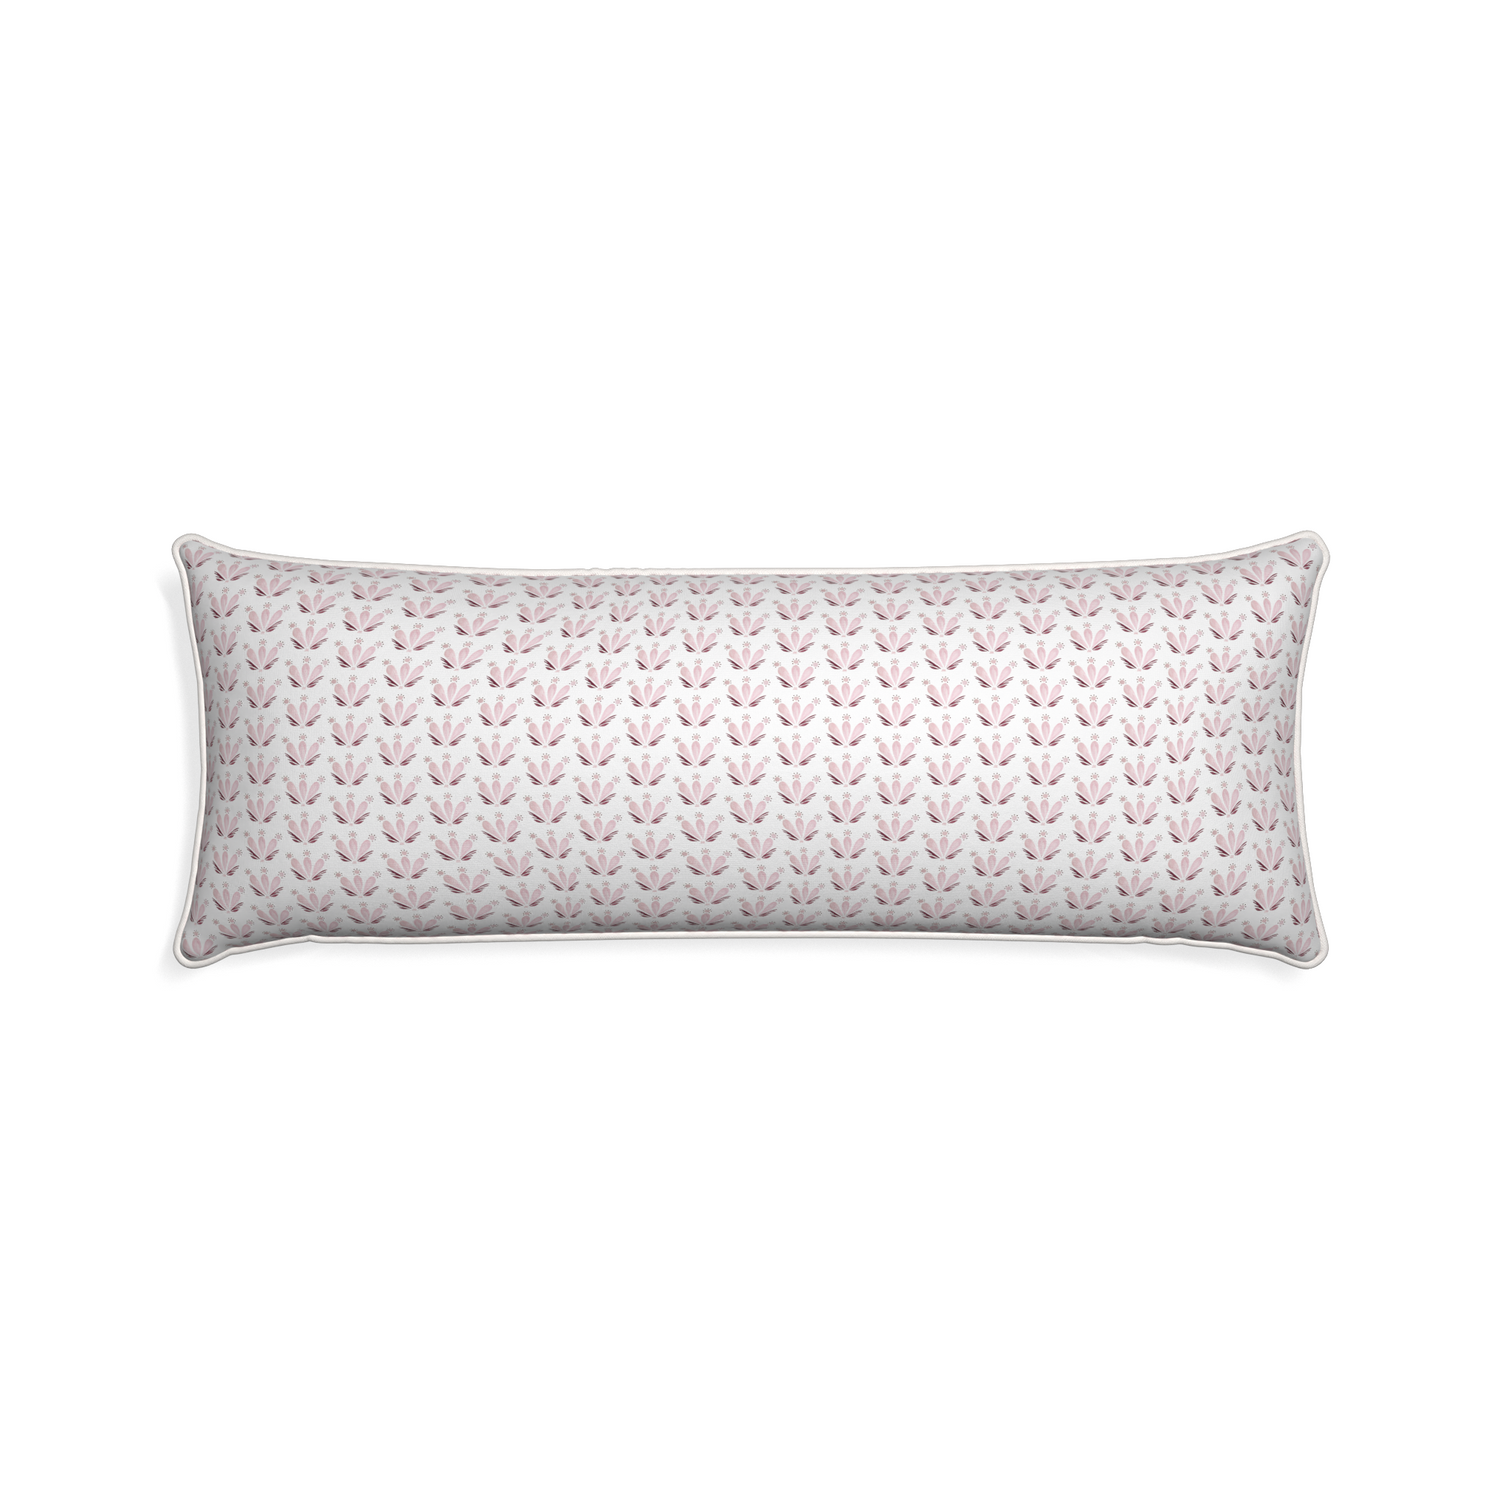 Xl-lumbar serena pink custom pink & burgundy drop repeat floralpillow with snow piping on white background